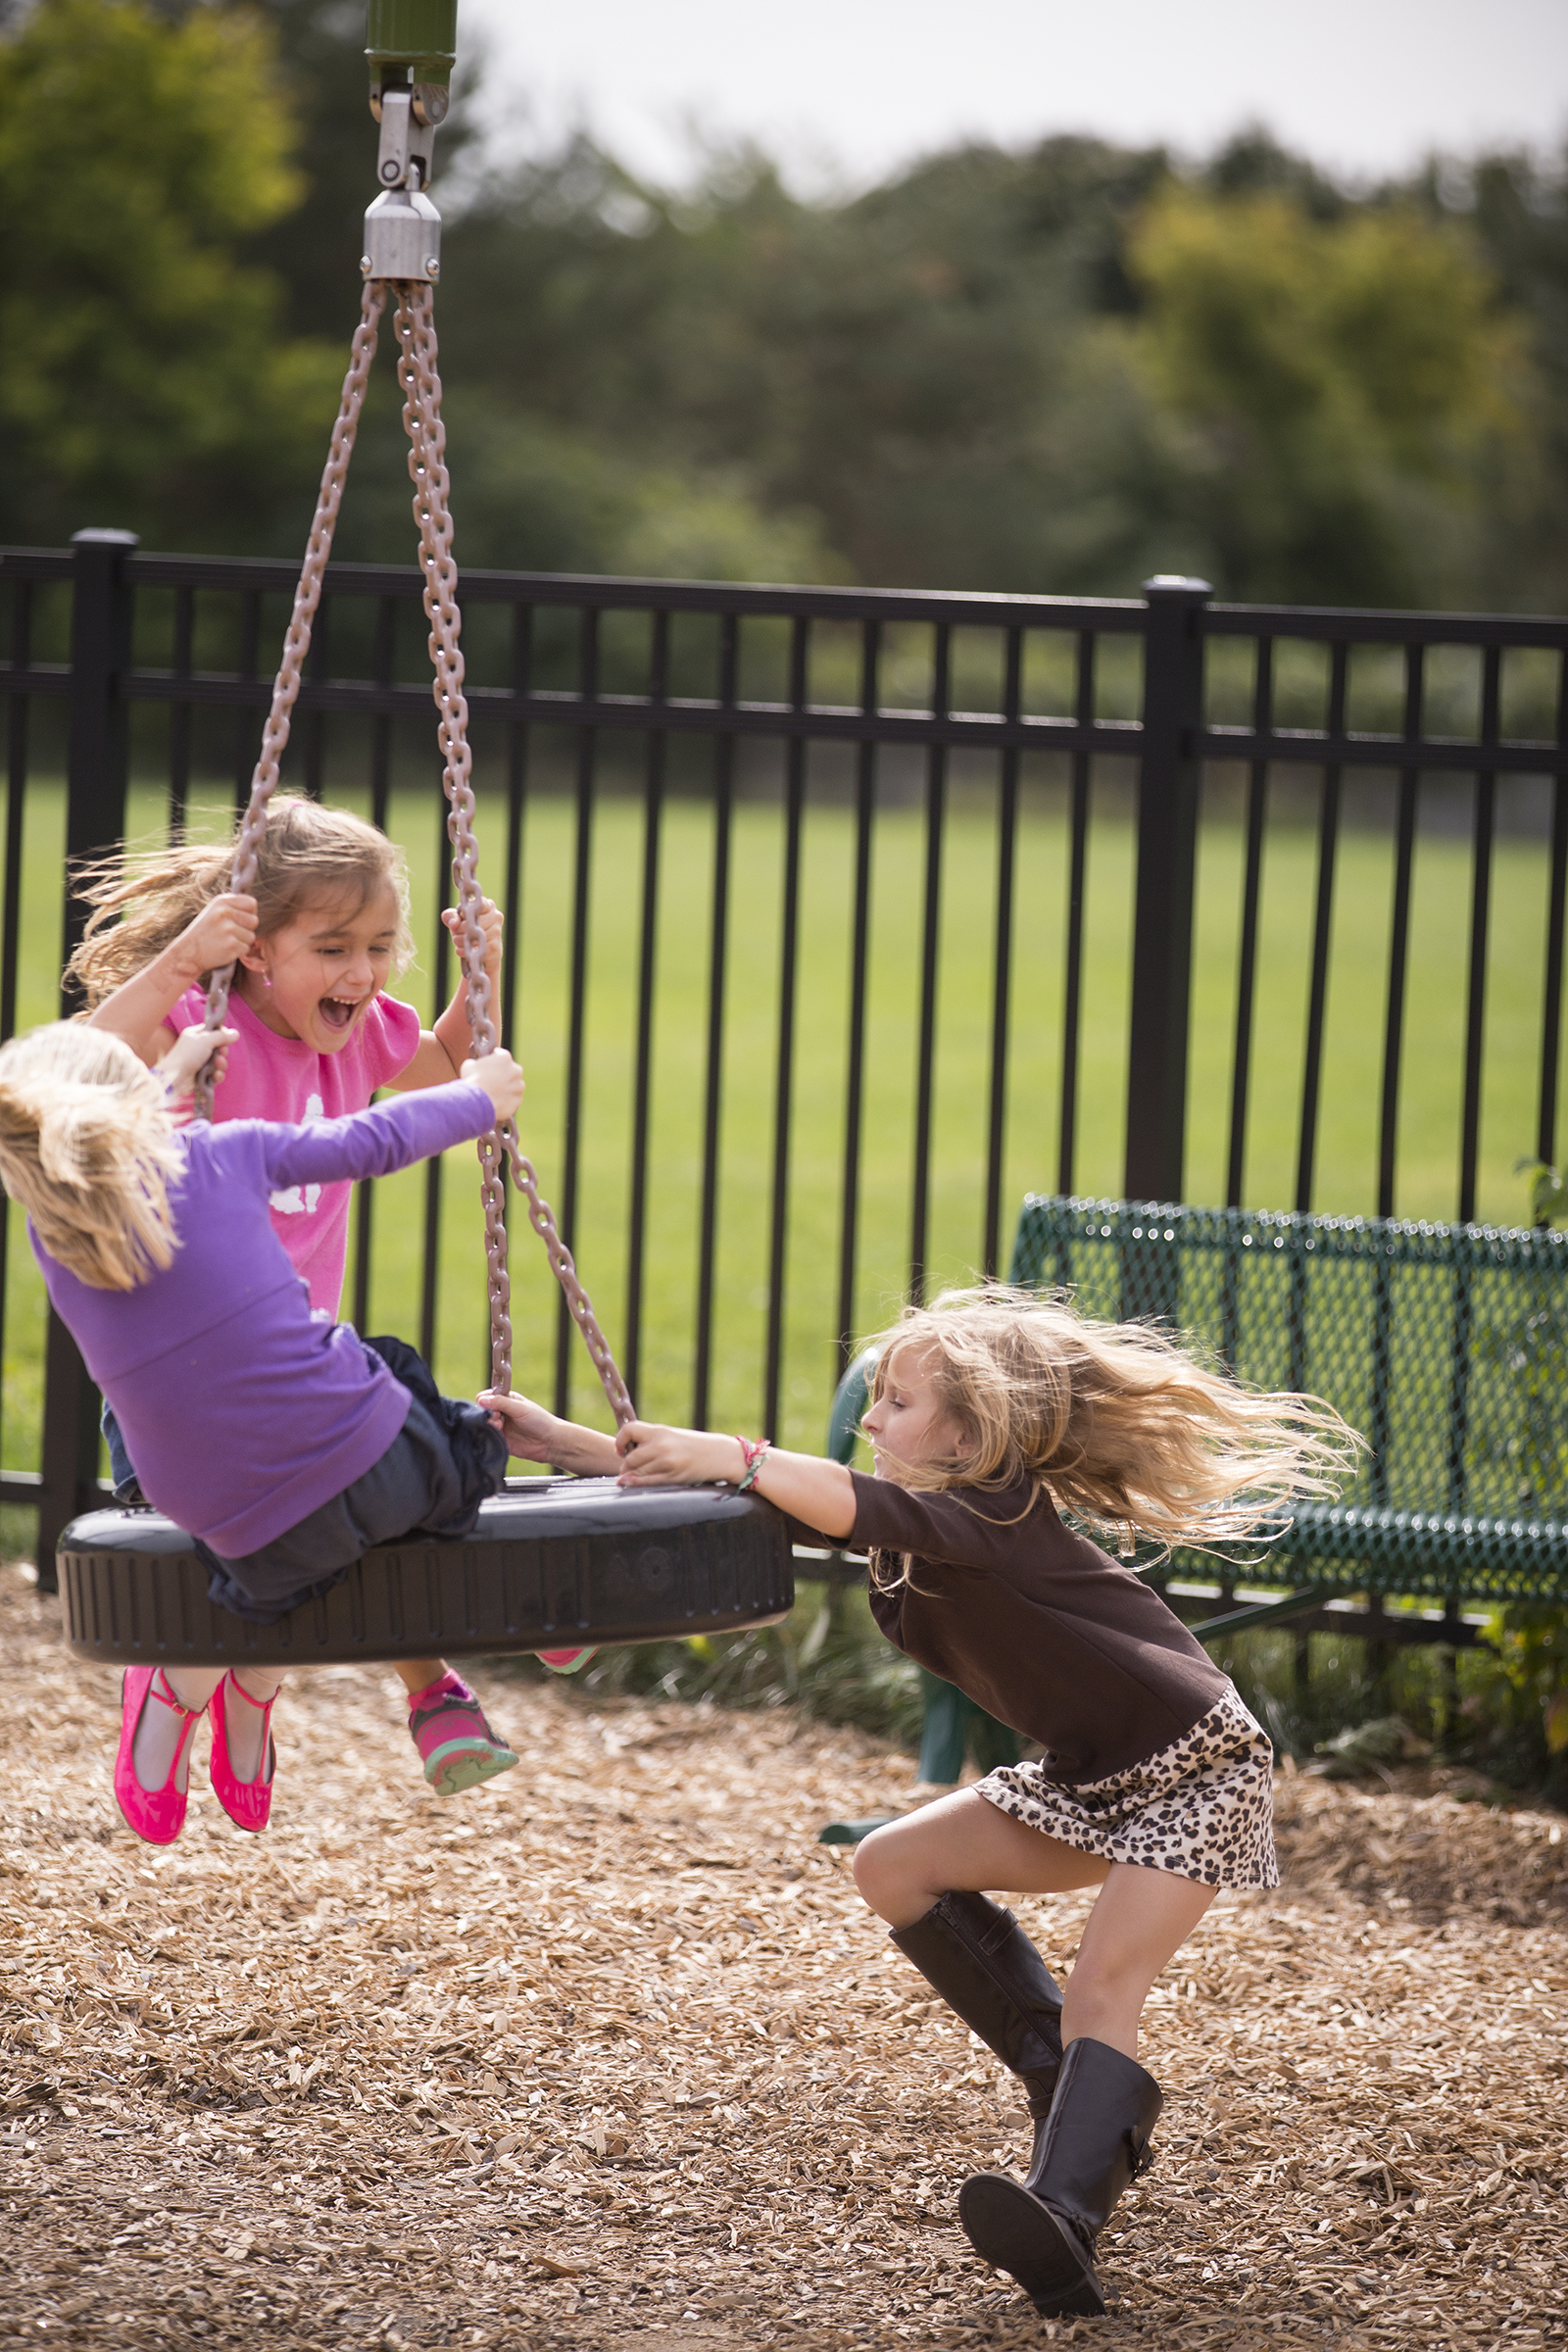 young girls on playground - Manlius Pebble Hill School